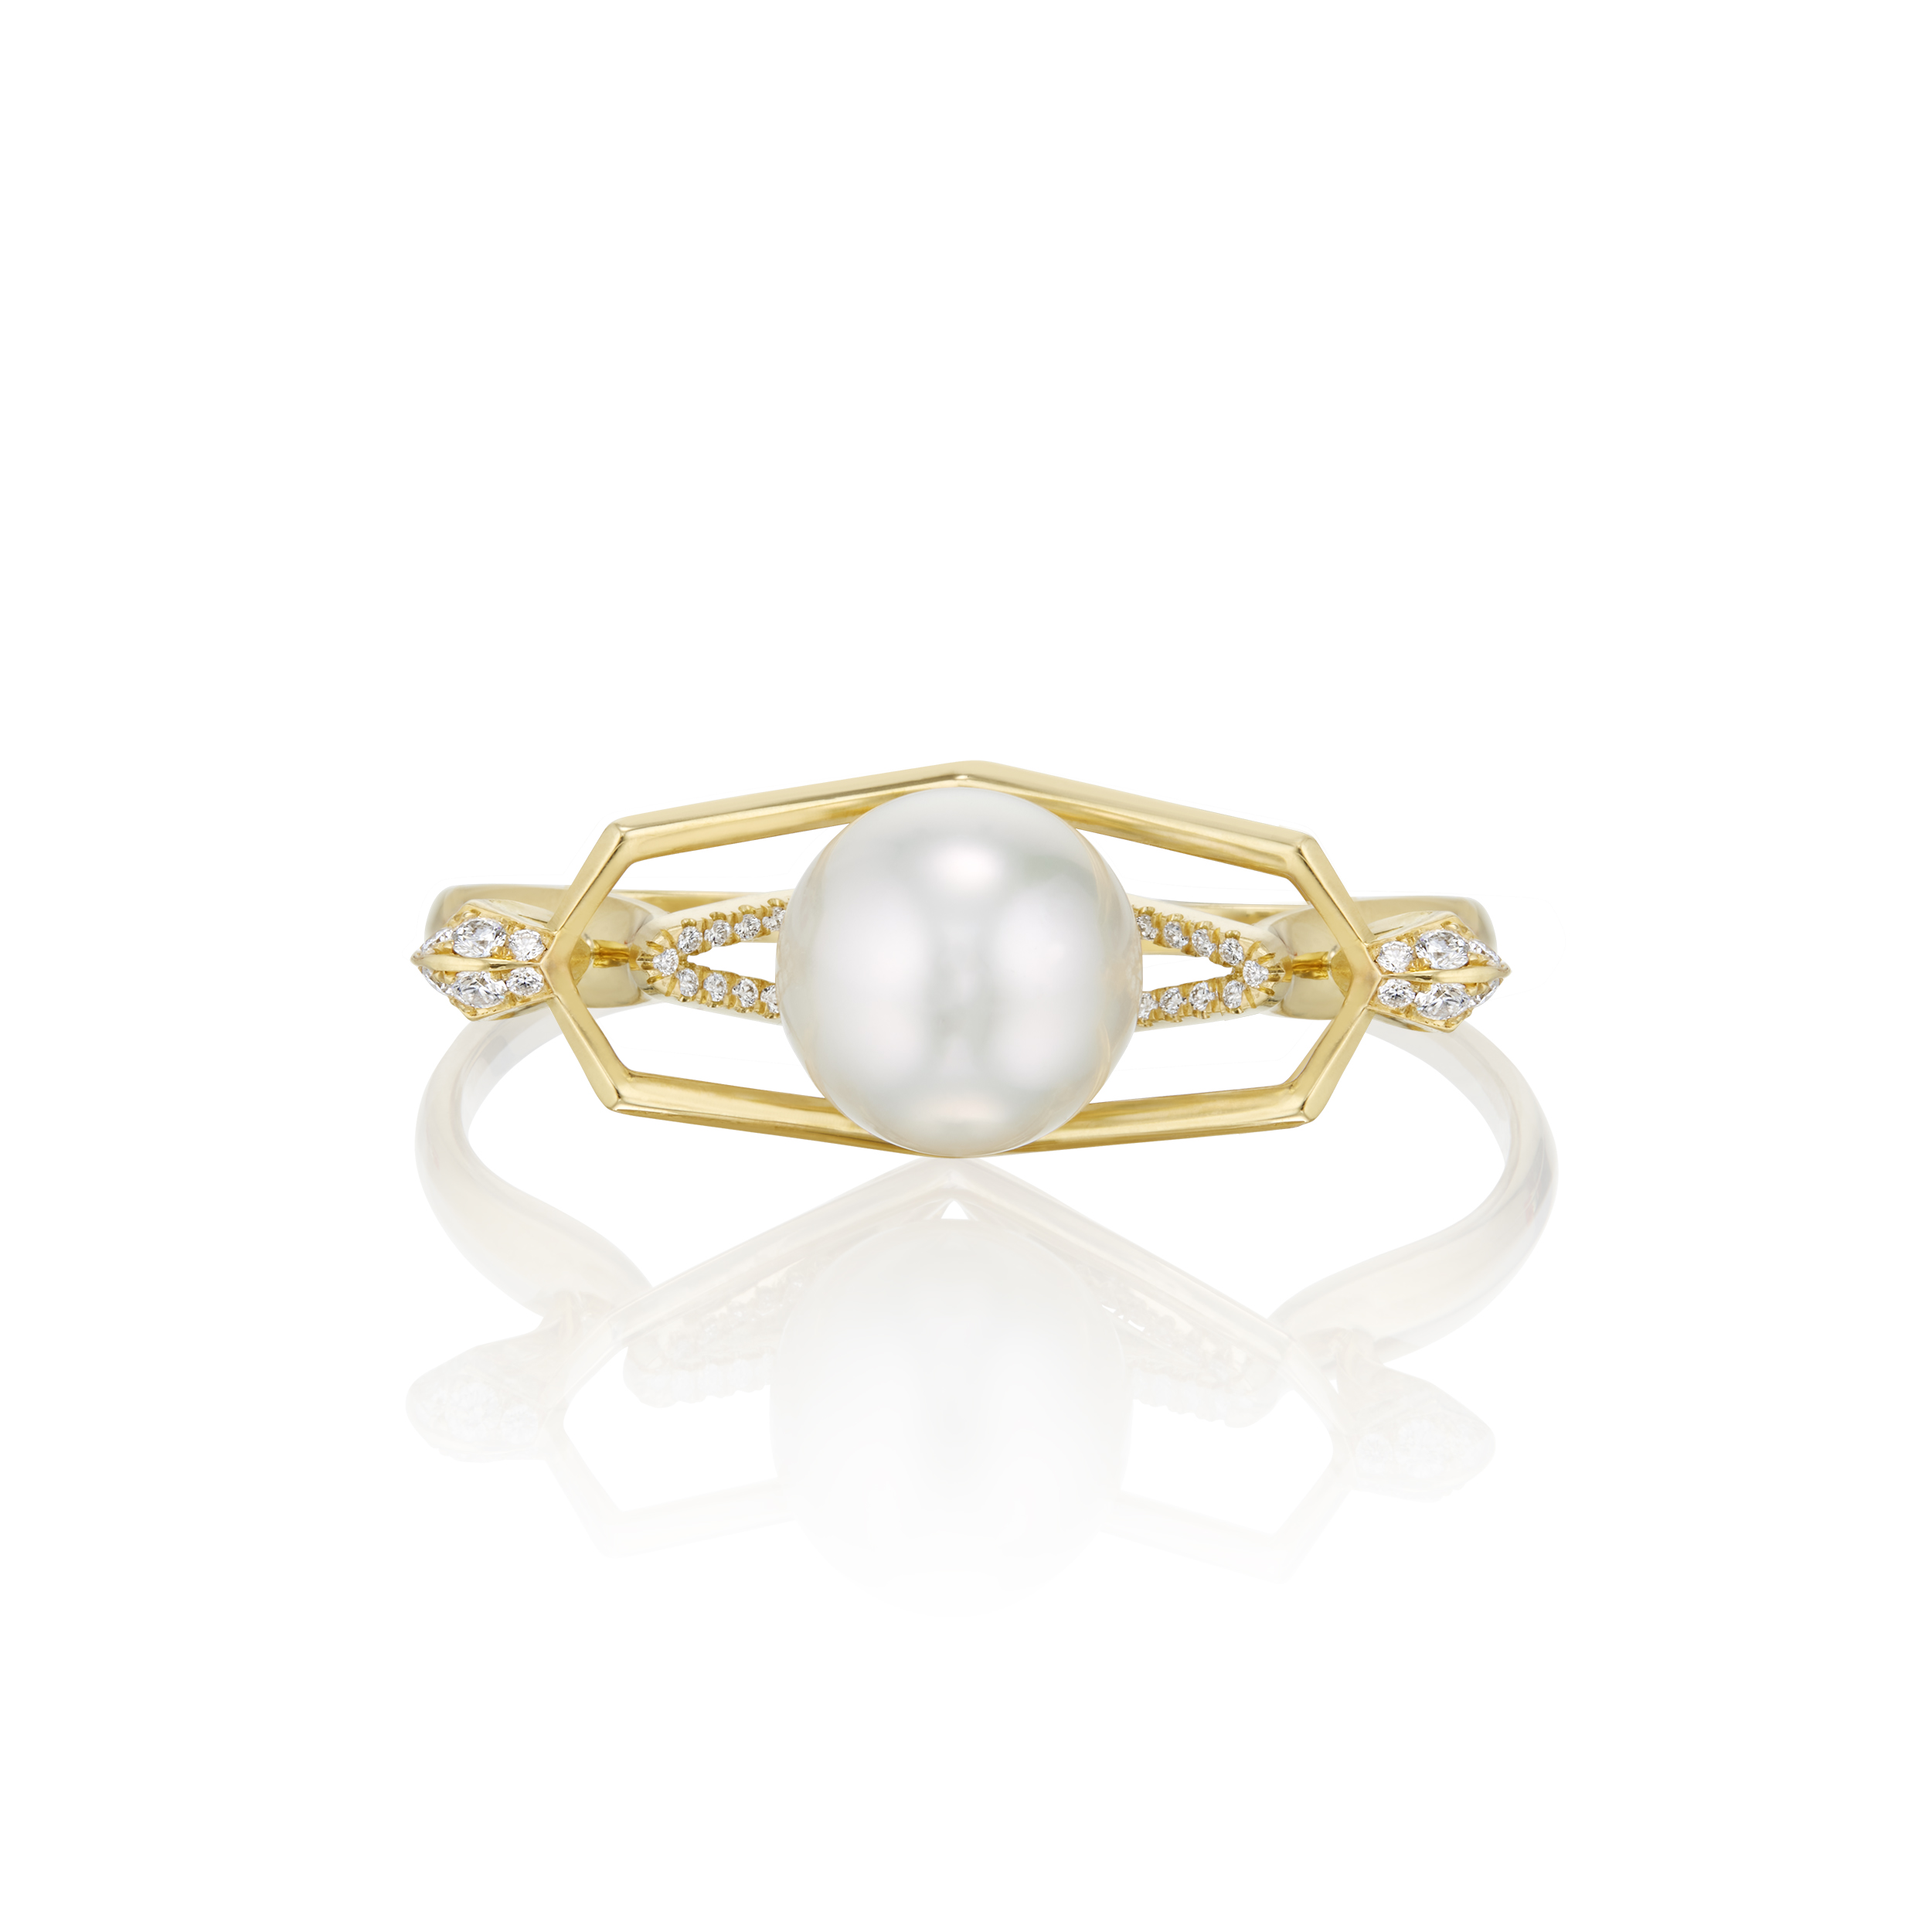 This is a product photo of the Renisis Halo Lotus Double Ring. It's large pearl and setting is facing forward.